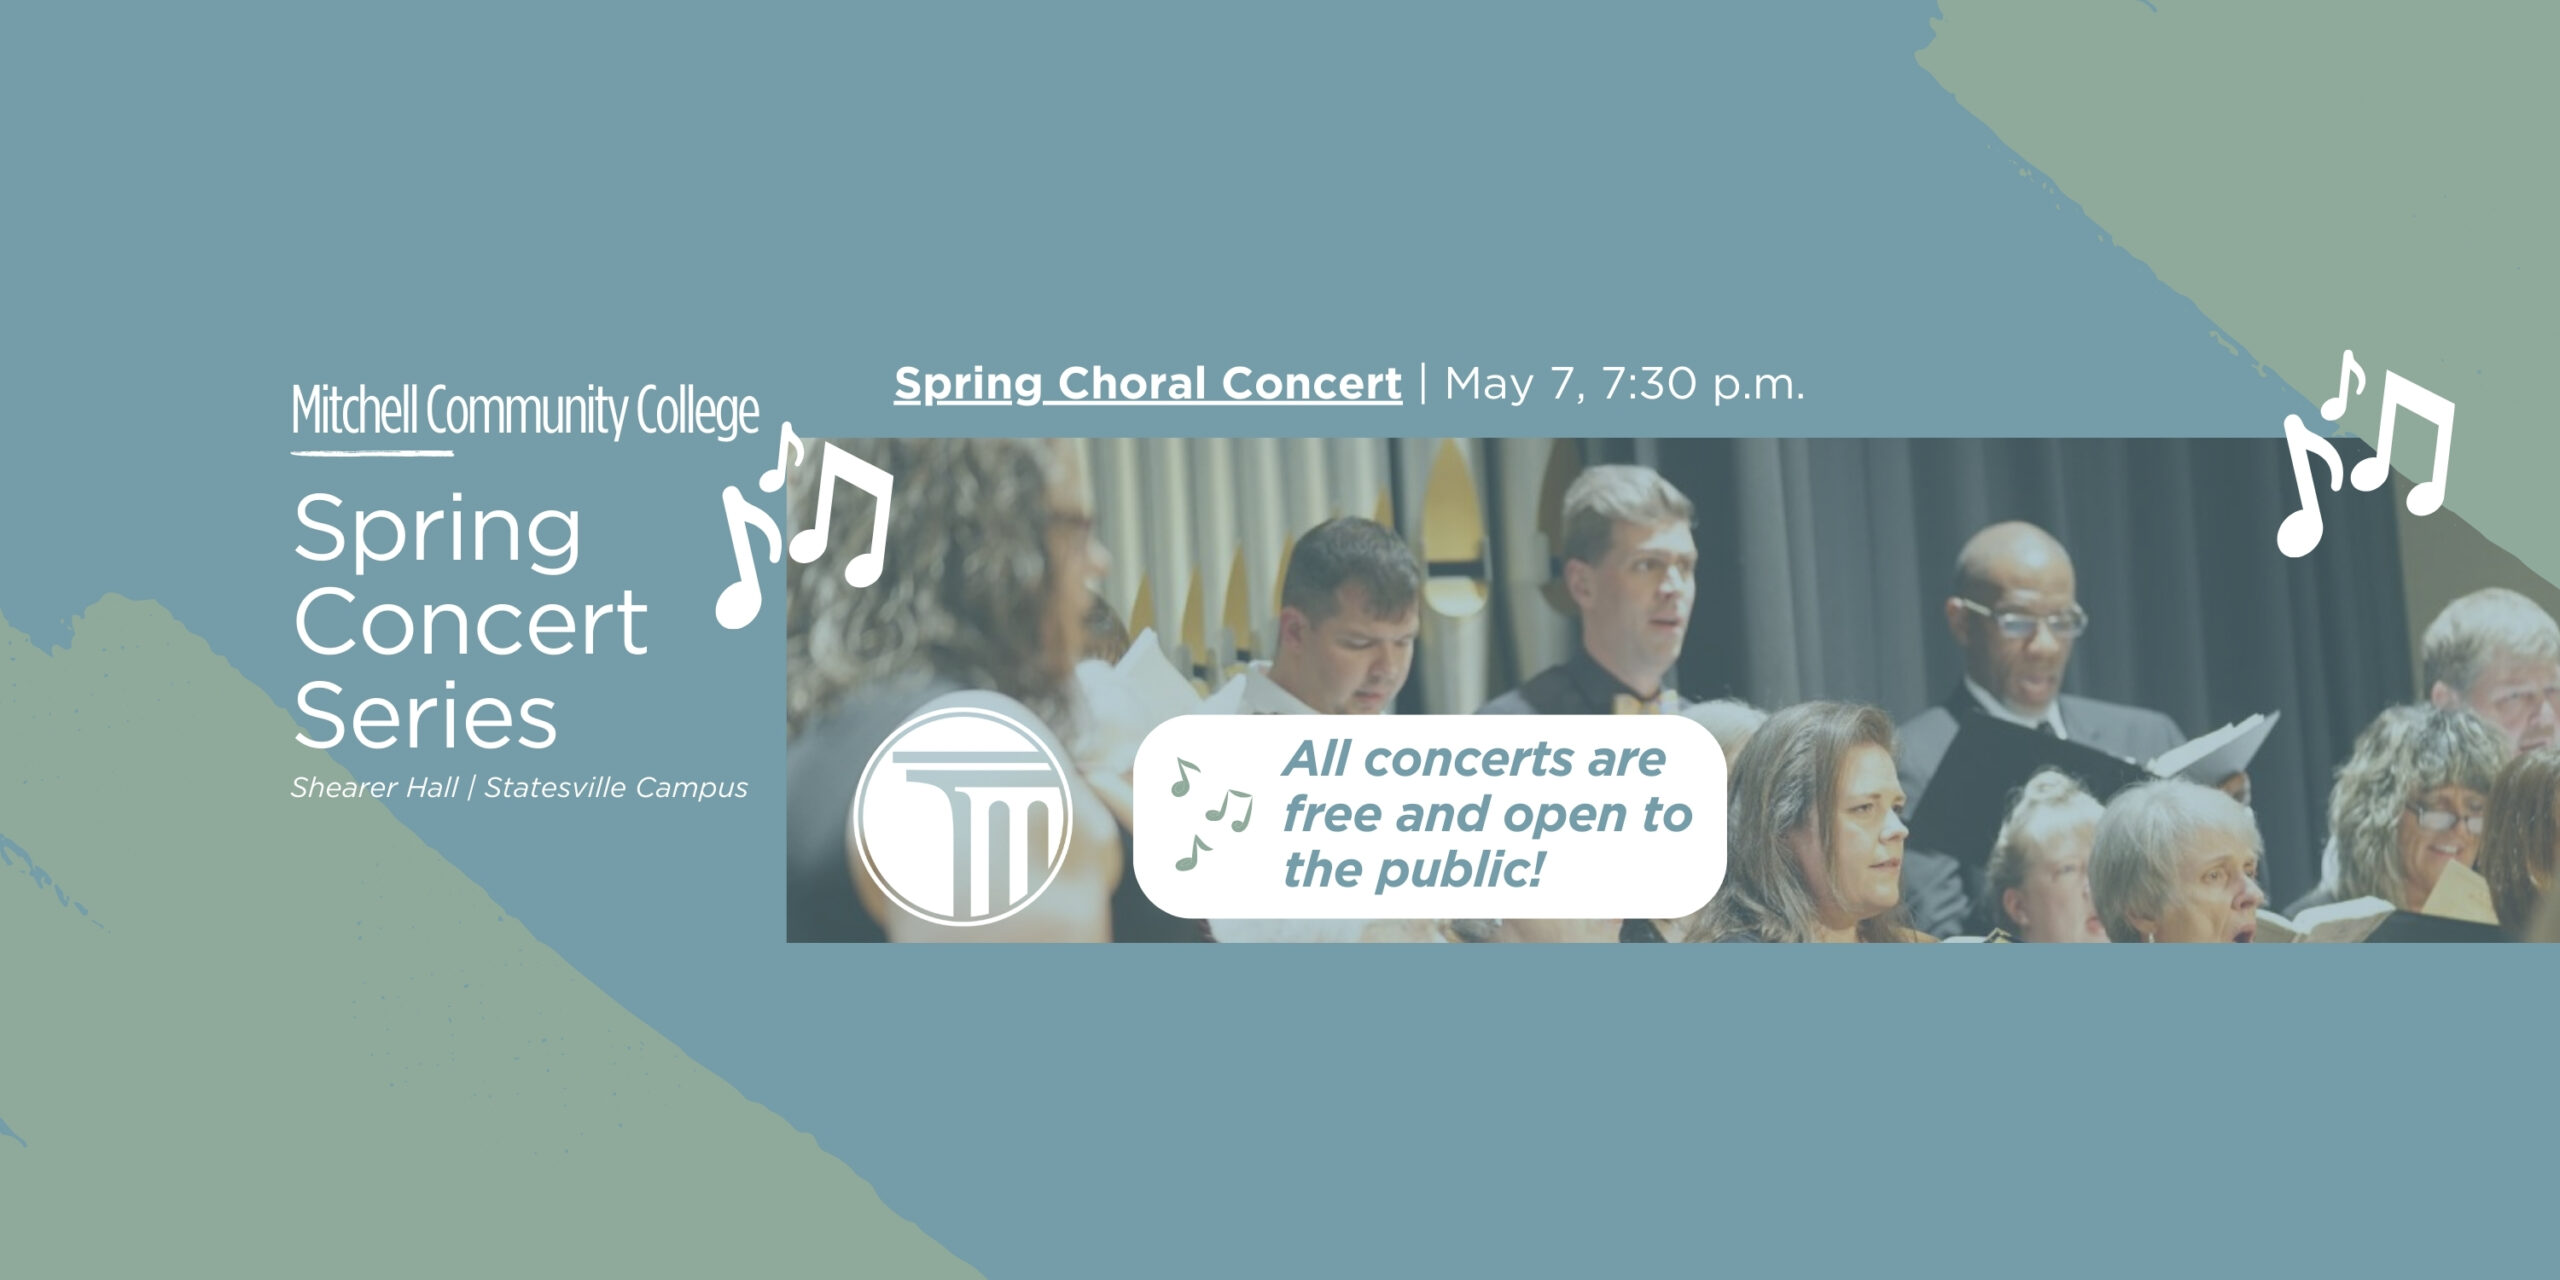 Banner that reads "Mitchell Community College | Spring Concert Series - Shearer Hall | Statesville | Spring Choral Concert - May 7, 7:30 p.m. | All concerts are free and open to the public!".